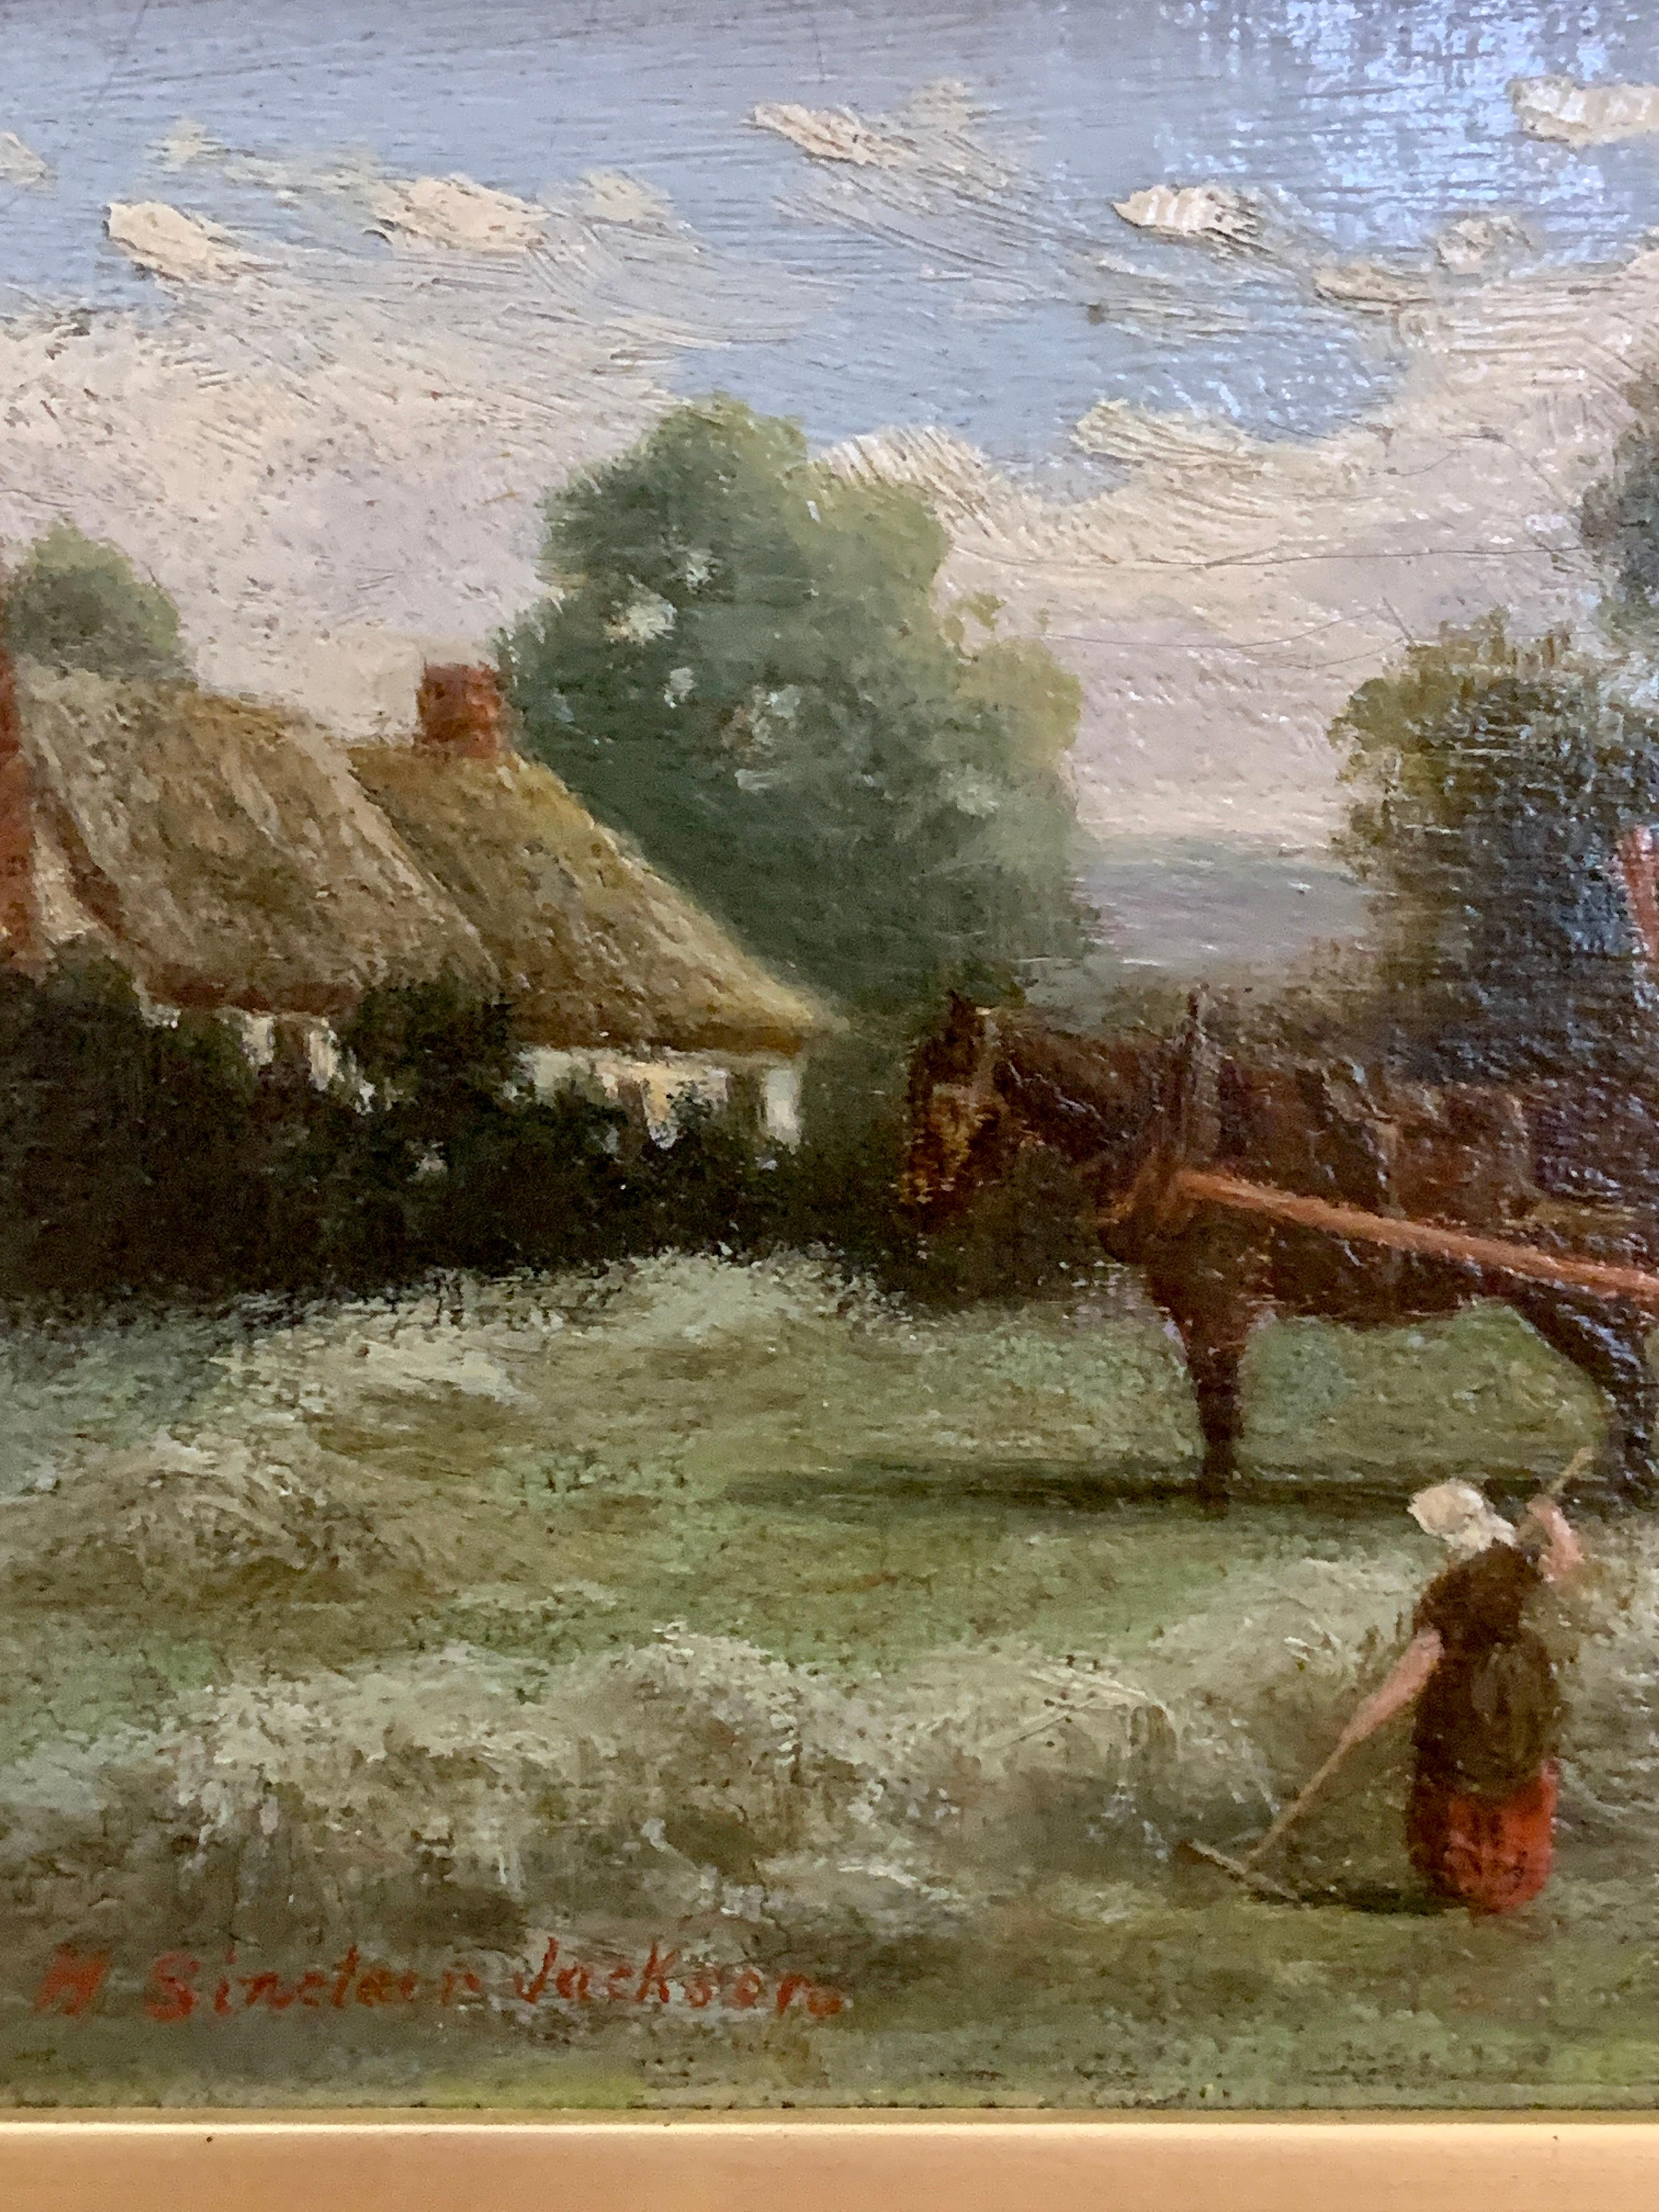 Victorian English 19th century landscape with cart, Farmers, Horse and harvest - Brown Figurative Painting by Henry Sinclair Jackson